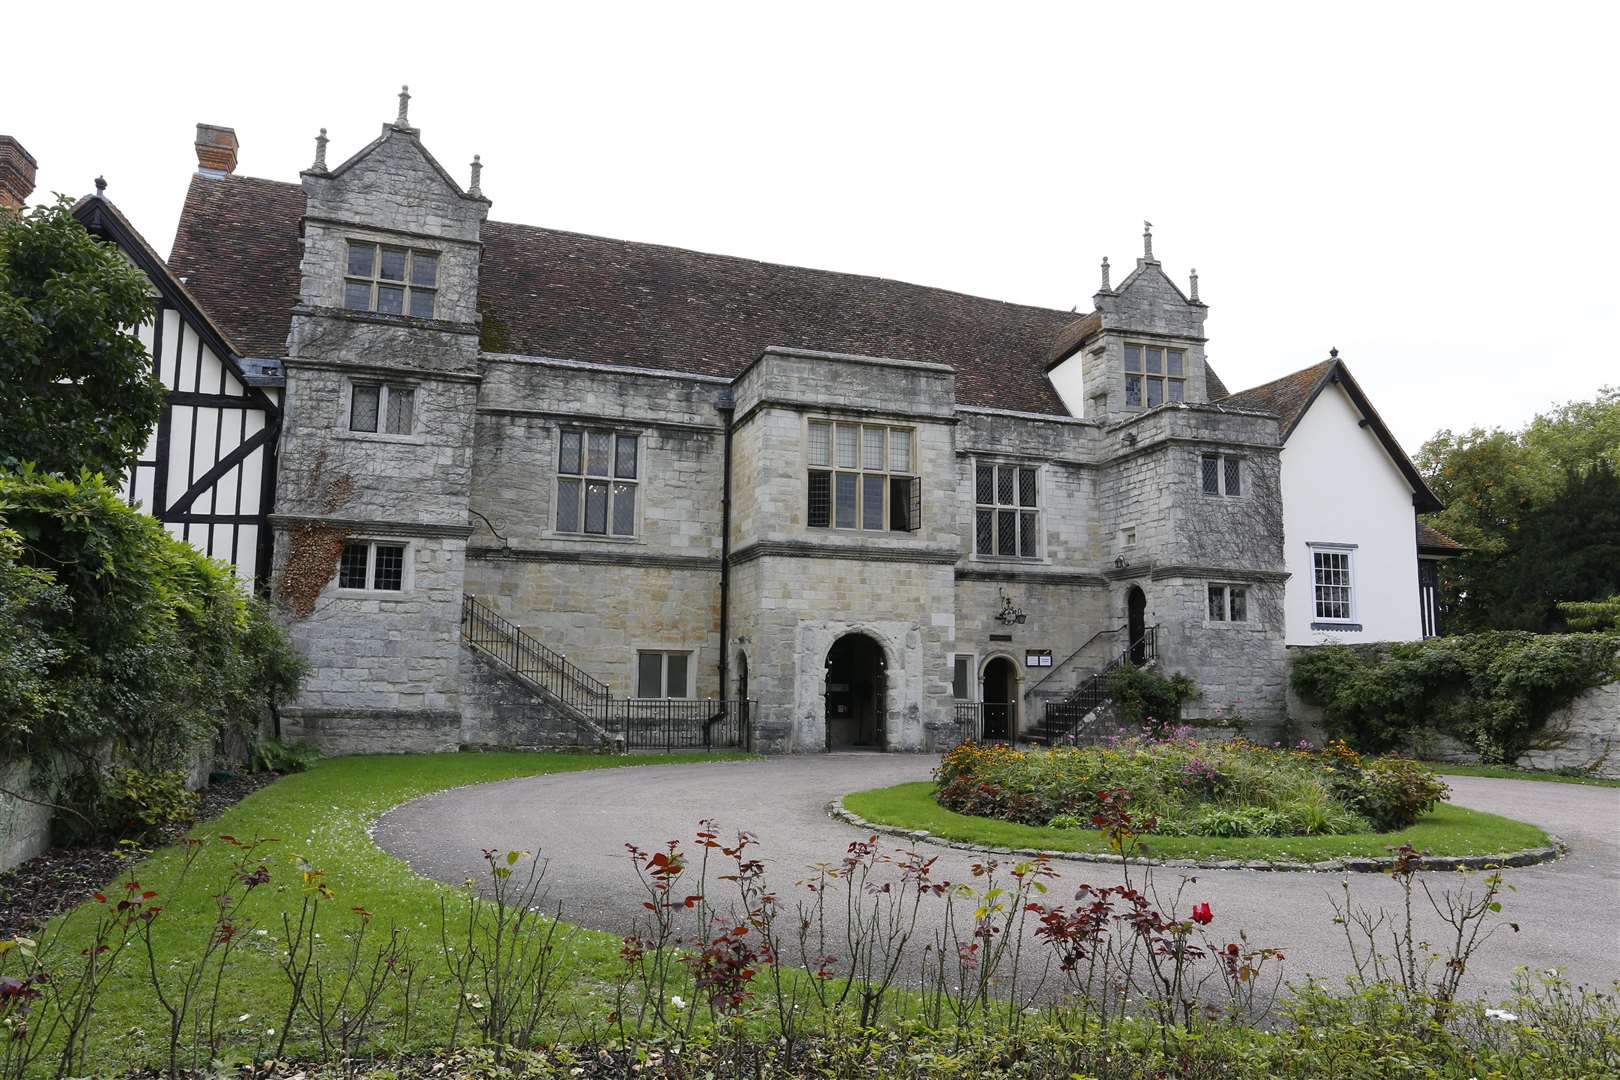 Mr Maynard's inquest was held at Archbishop's Palace in Maidstone